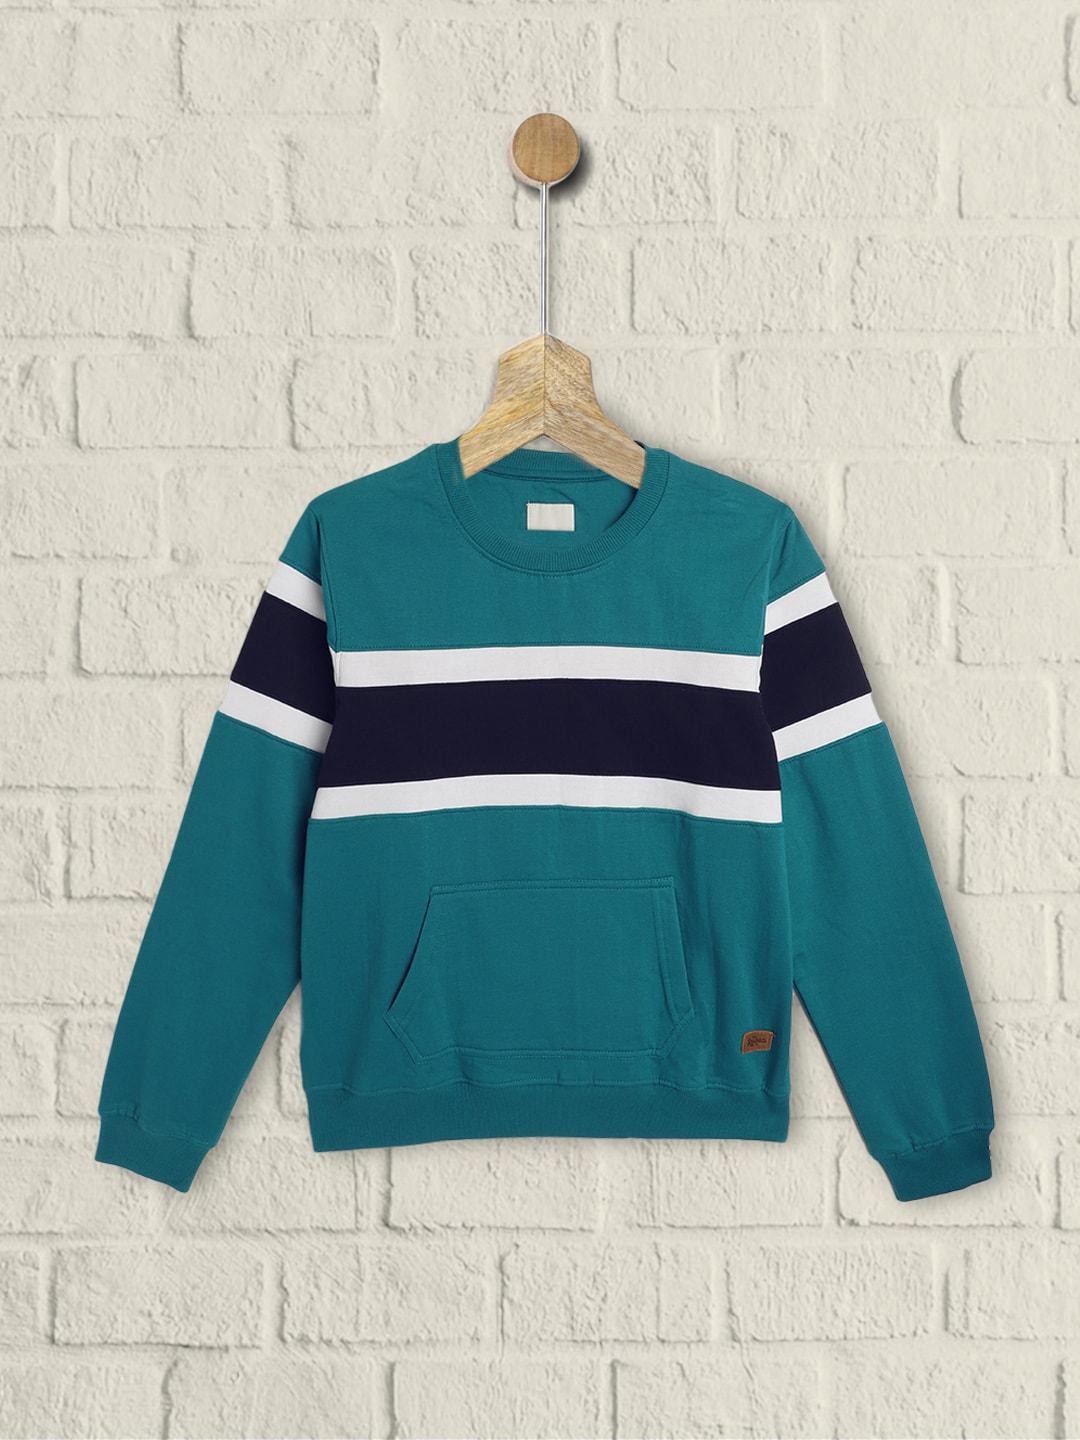 uth by roadster boys teal blue & white striped sweatshirt